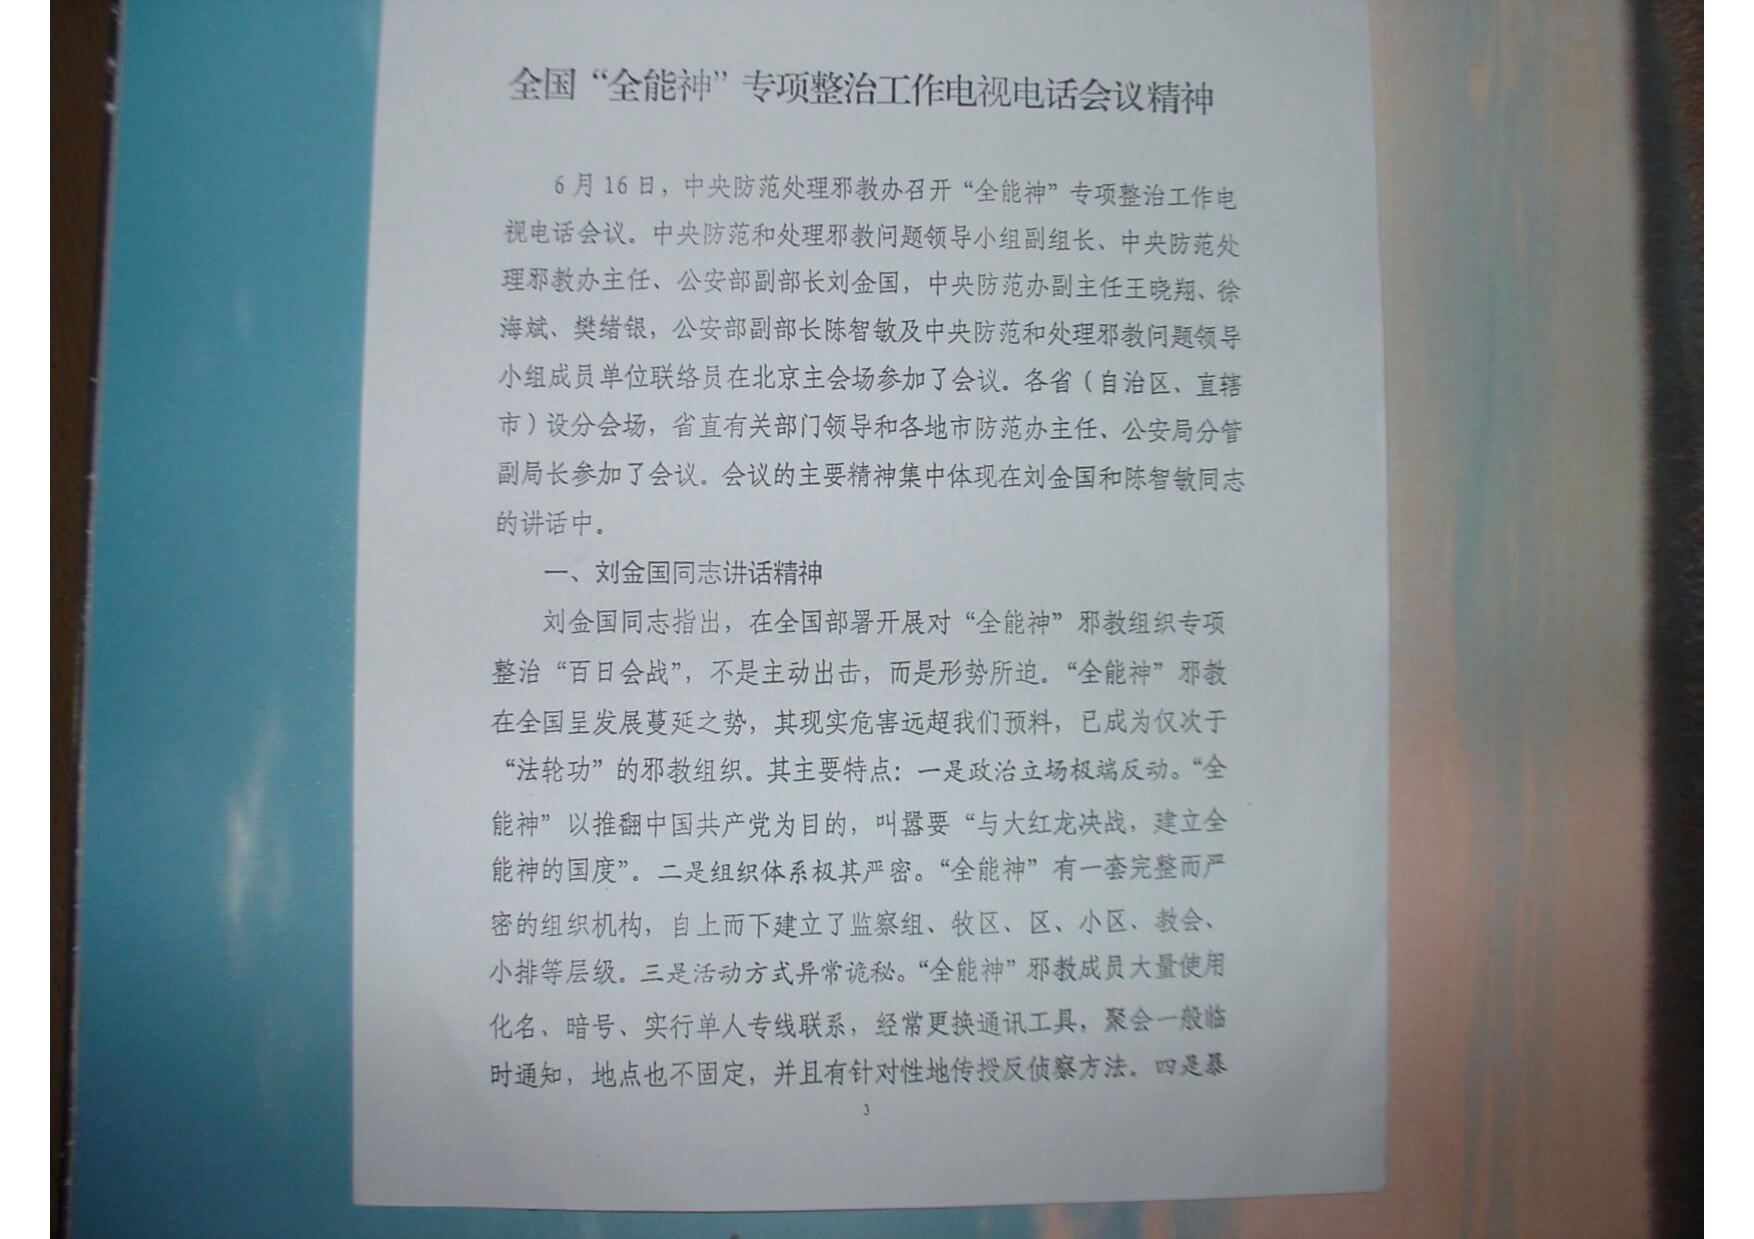 Document On The Nationwide Teleconference Held By The CCP 610 Office On June 16, 2014 - CN 拷貝